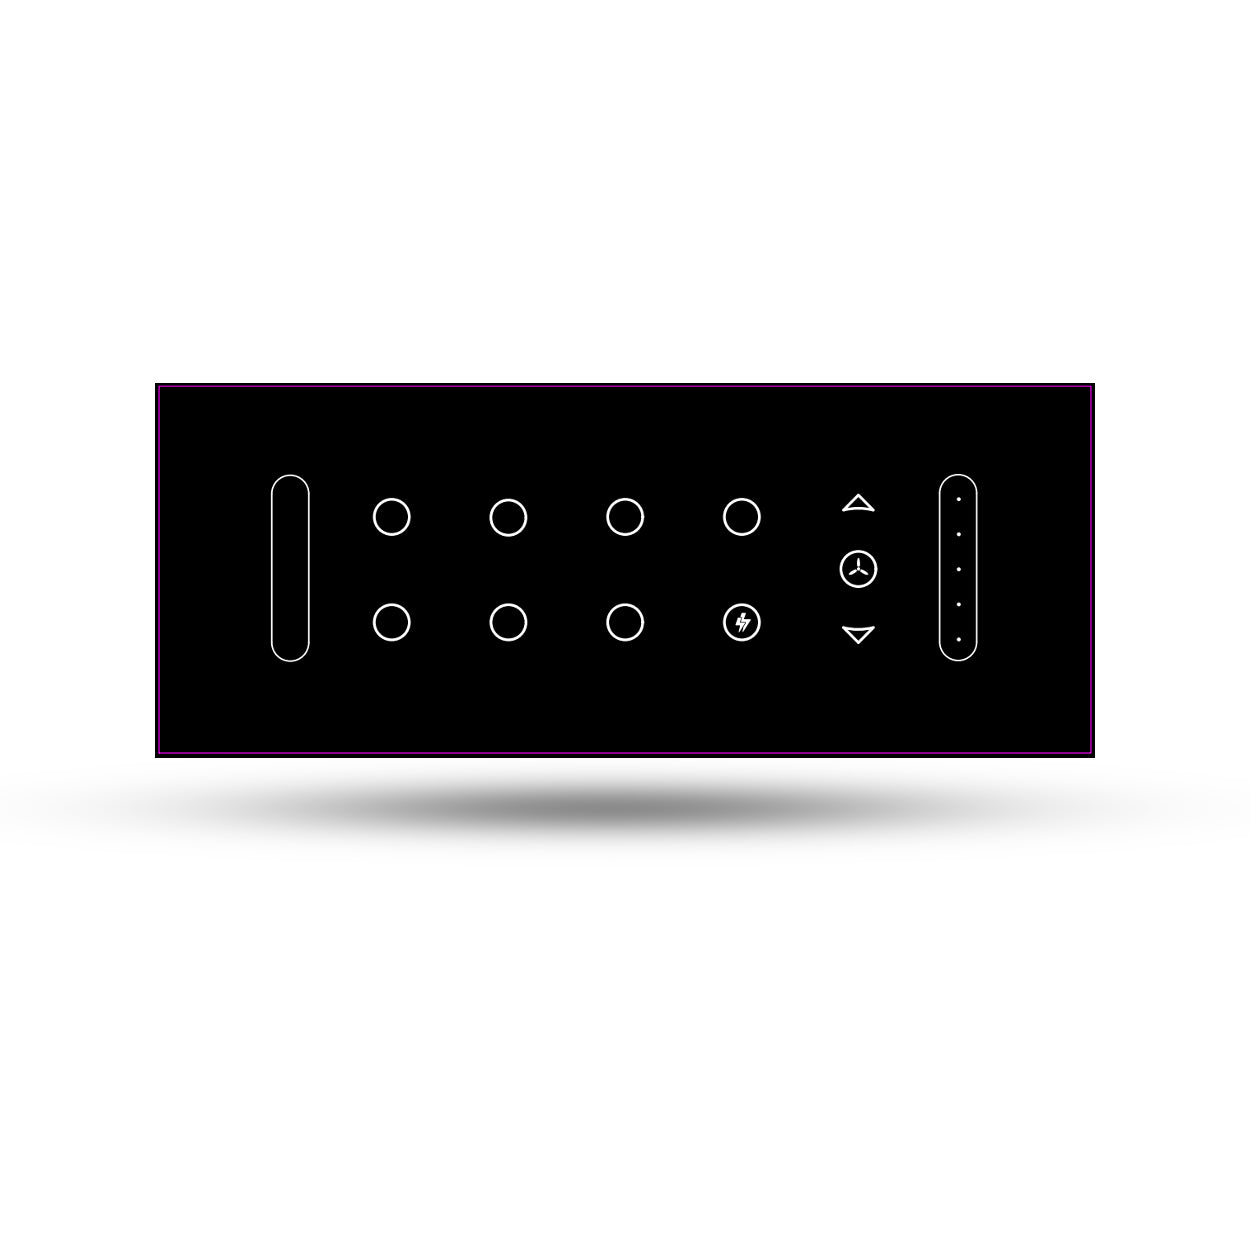 ANKUR MAGSYNC 6 GANG SMART WIFI TOUCH SWITCH PANEL with 7 SWITCH, 1 AC, 1 FAN, 1 DIMMER AND BUILT-IN IR BLASTER